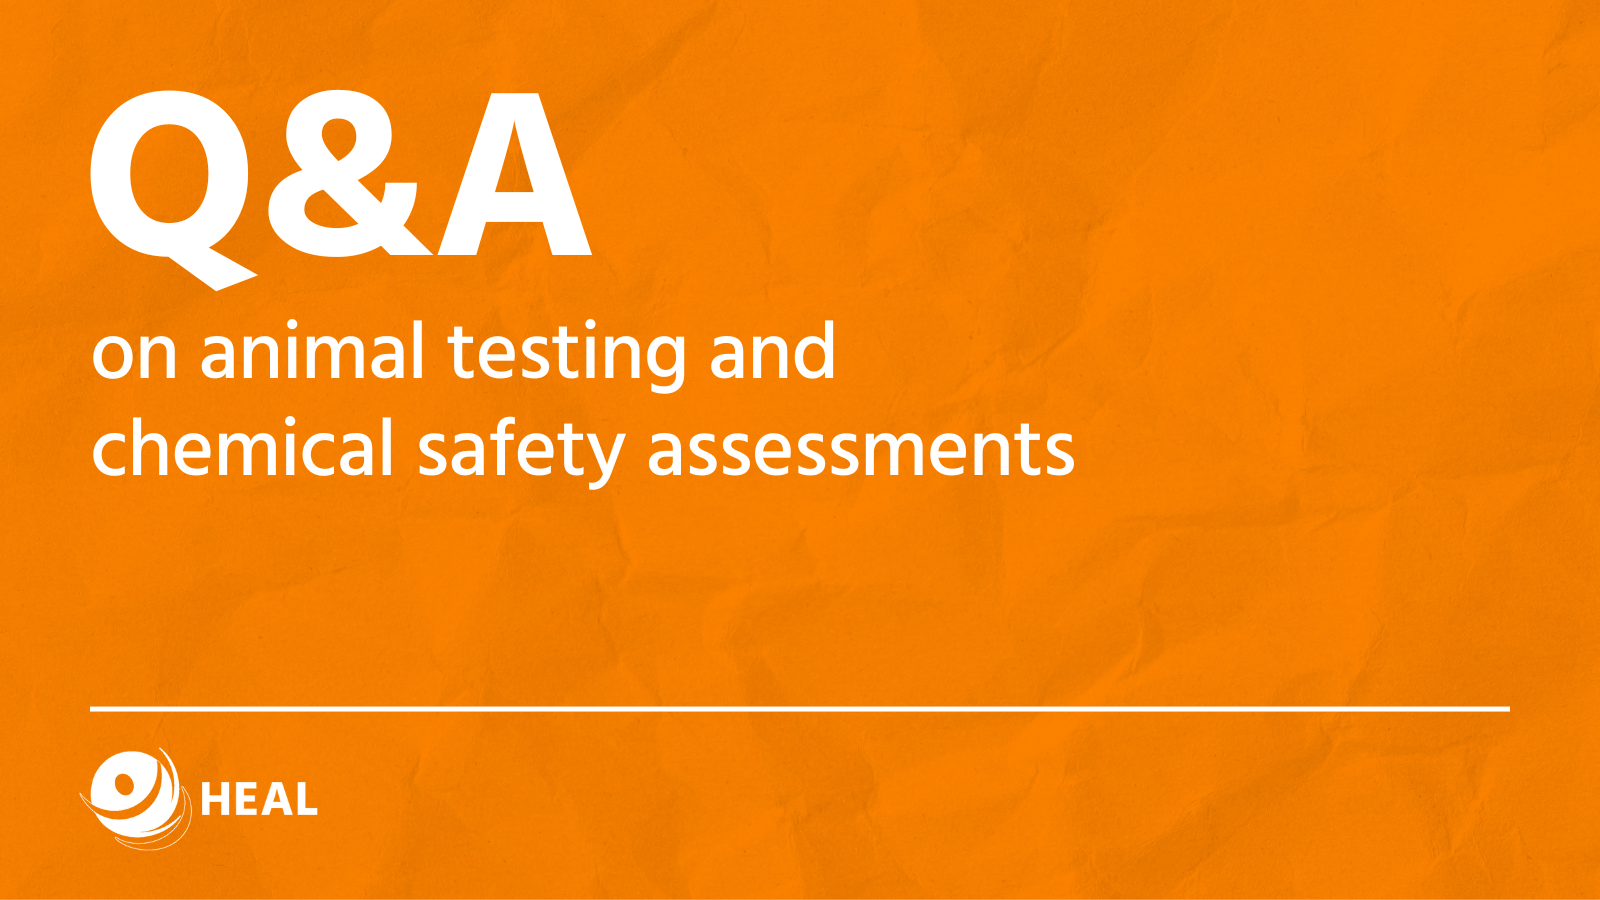 Q&A on animal testing and chemical safety assessments